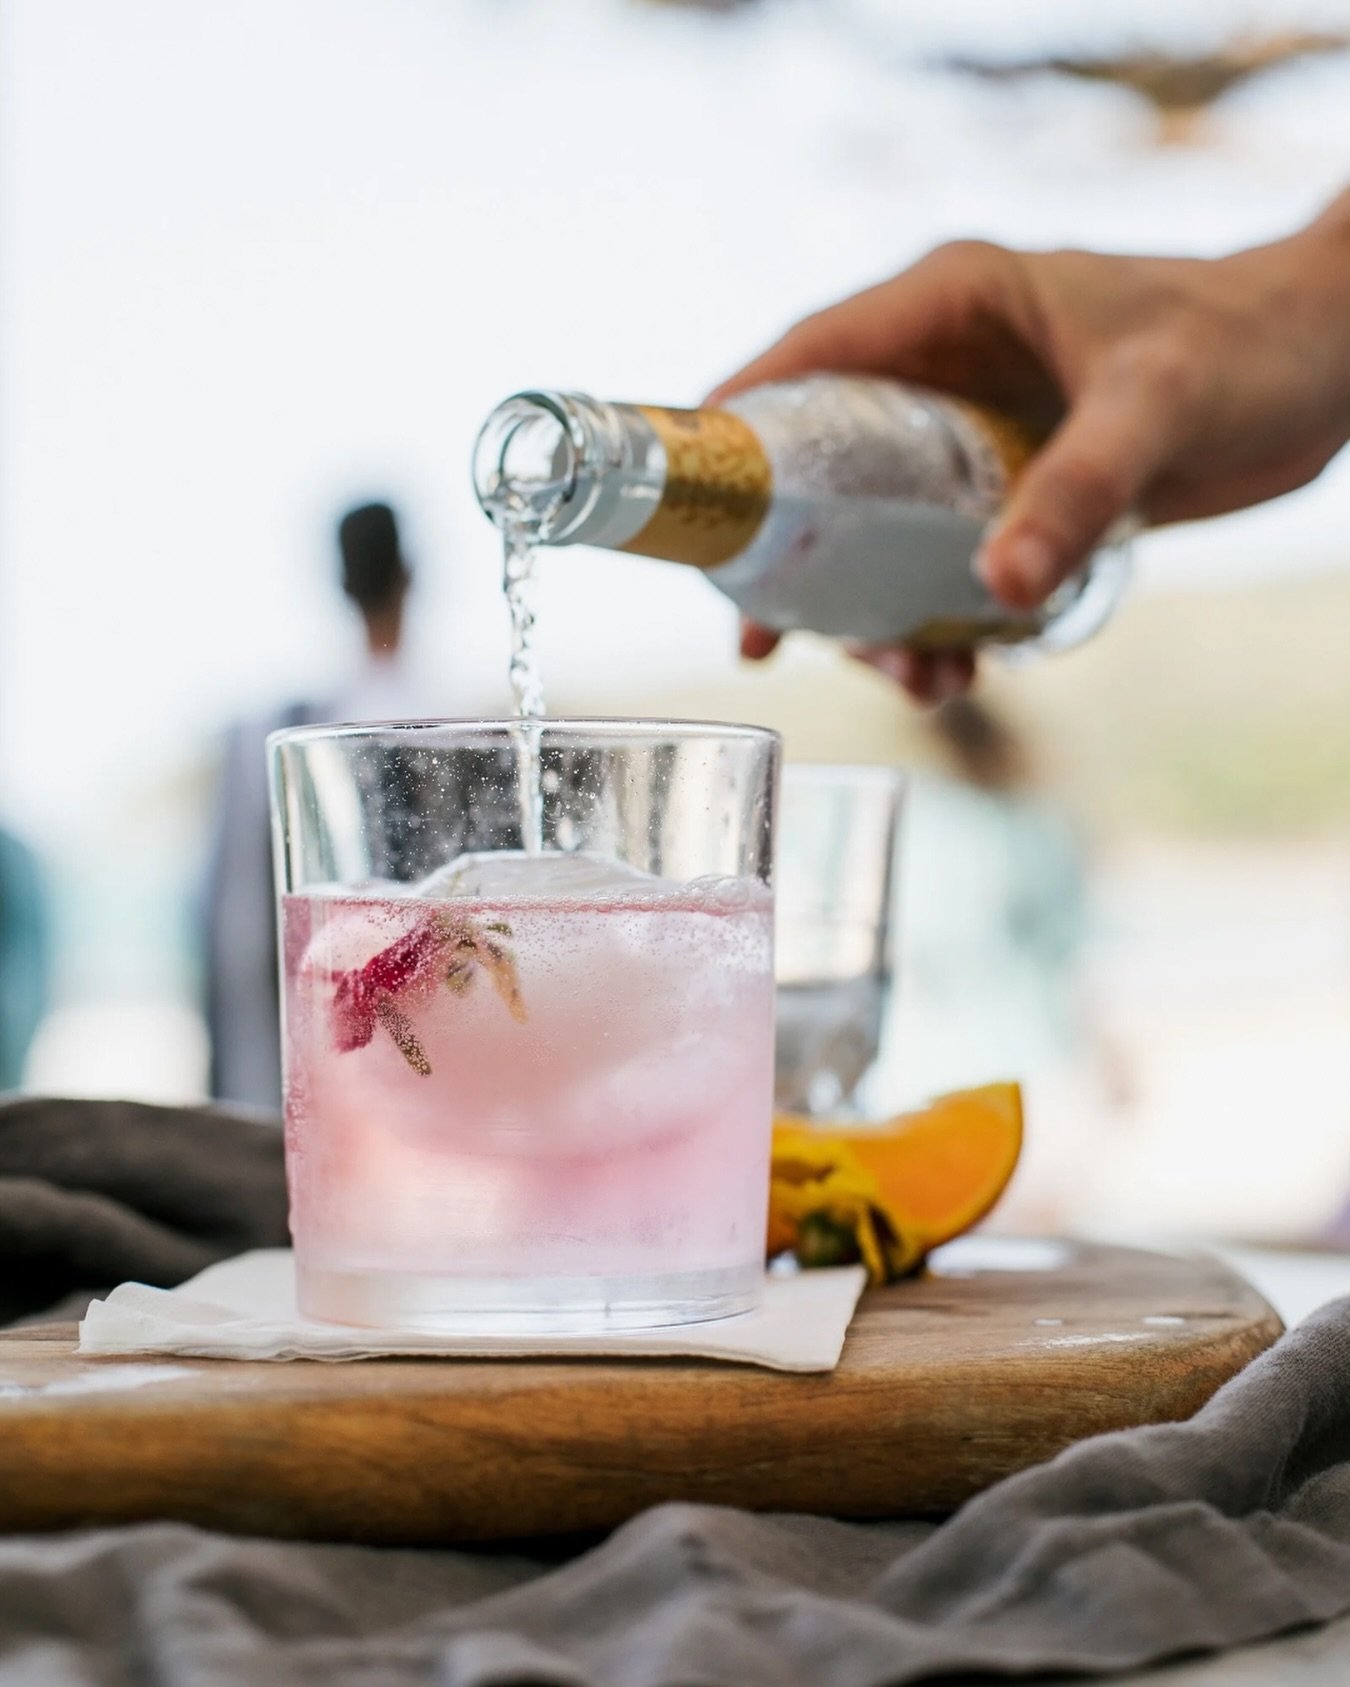 Friday afternoon feels ✨ Slowly easing into the weekend with our refreshing artisan gin selection, the perfect accompaniment to beachfront vibes and a laid-back Friday afternoon.

.
.
.

#fridayafternoon #gin #gintonic #ginlover #artisangin #fridayfe